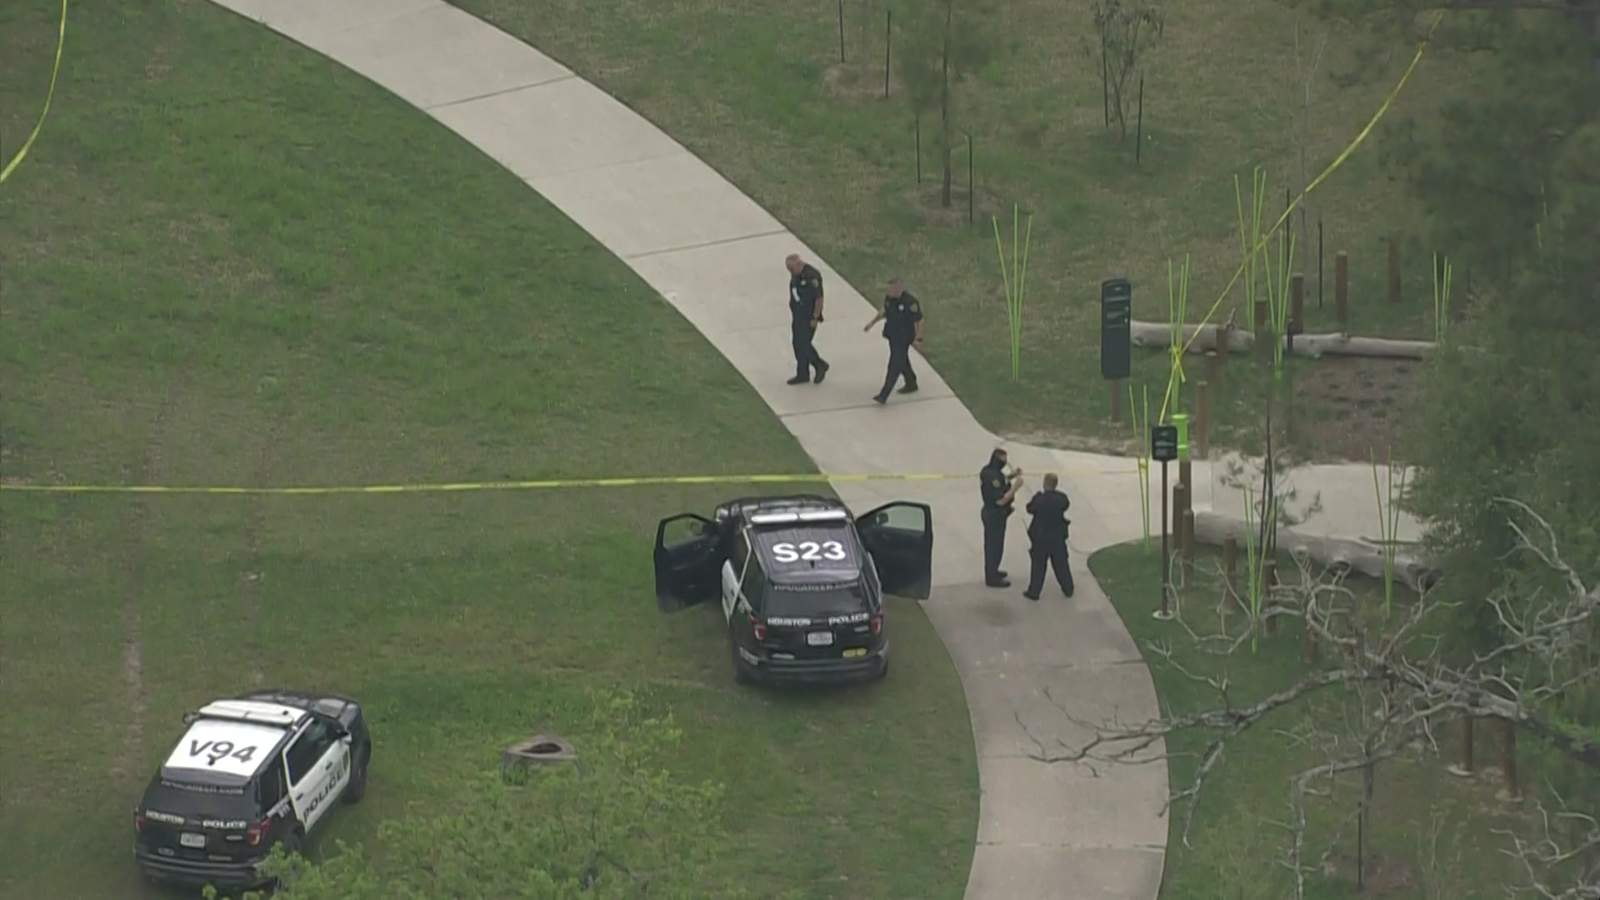 Skeletal remains discovered in east Houston field, police say